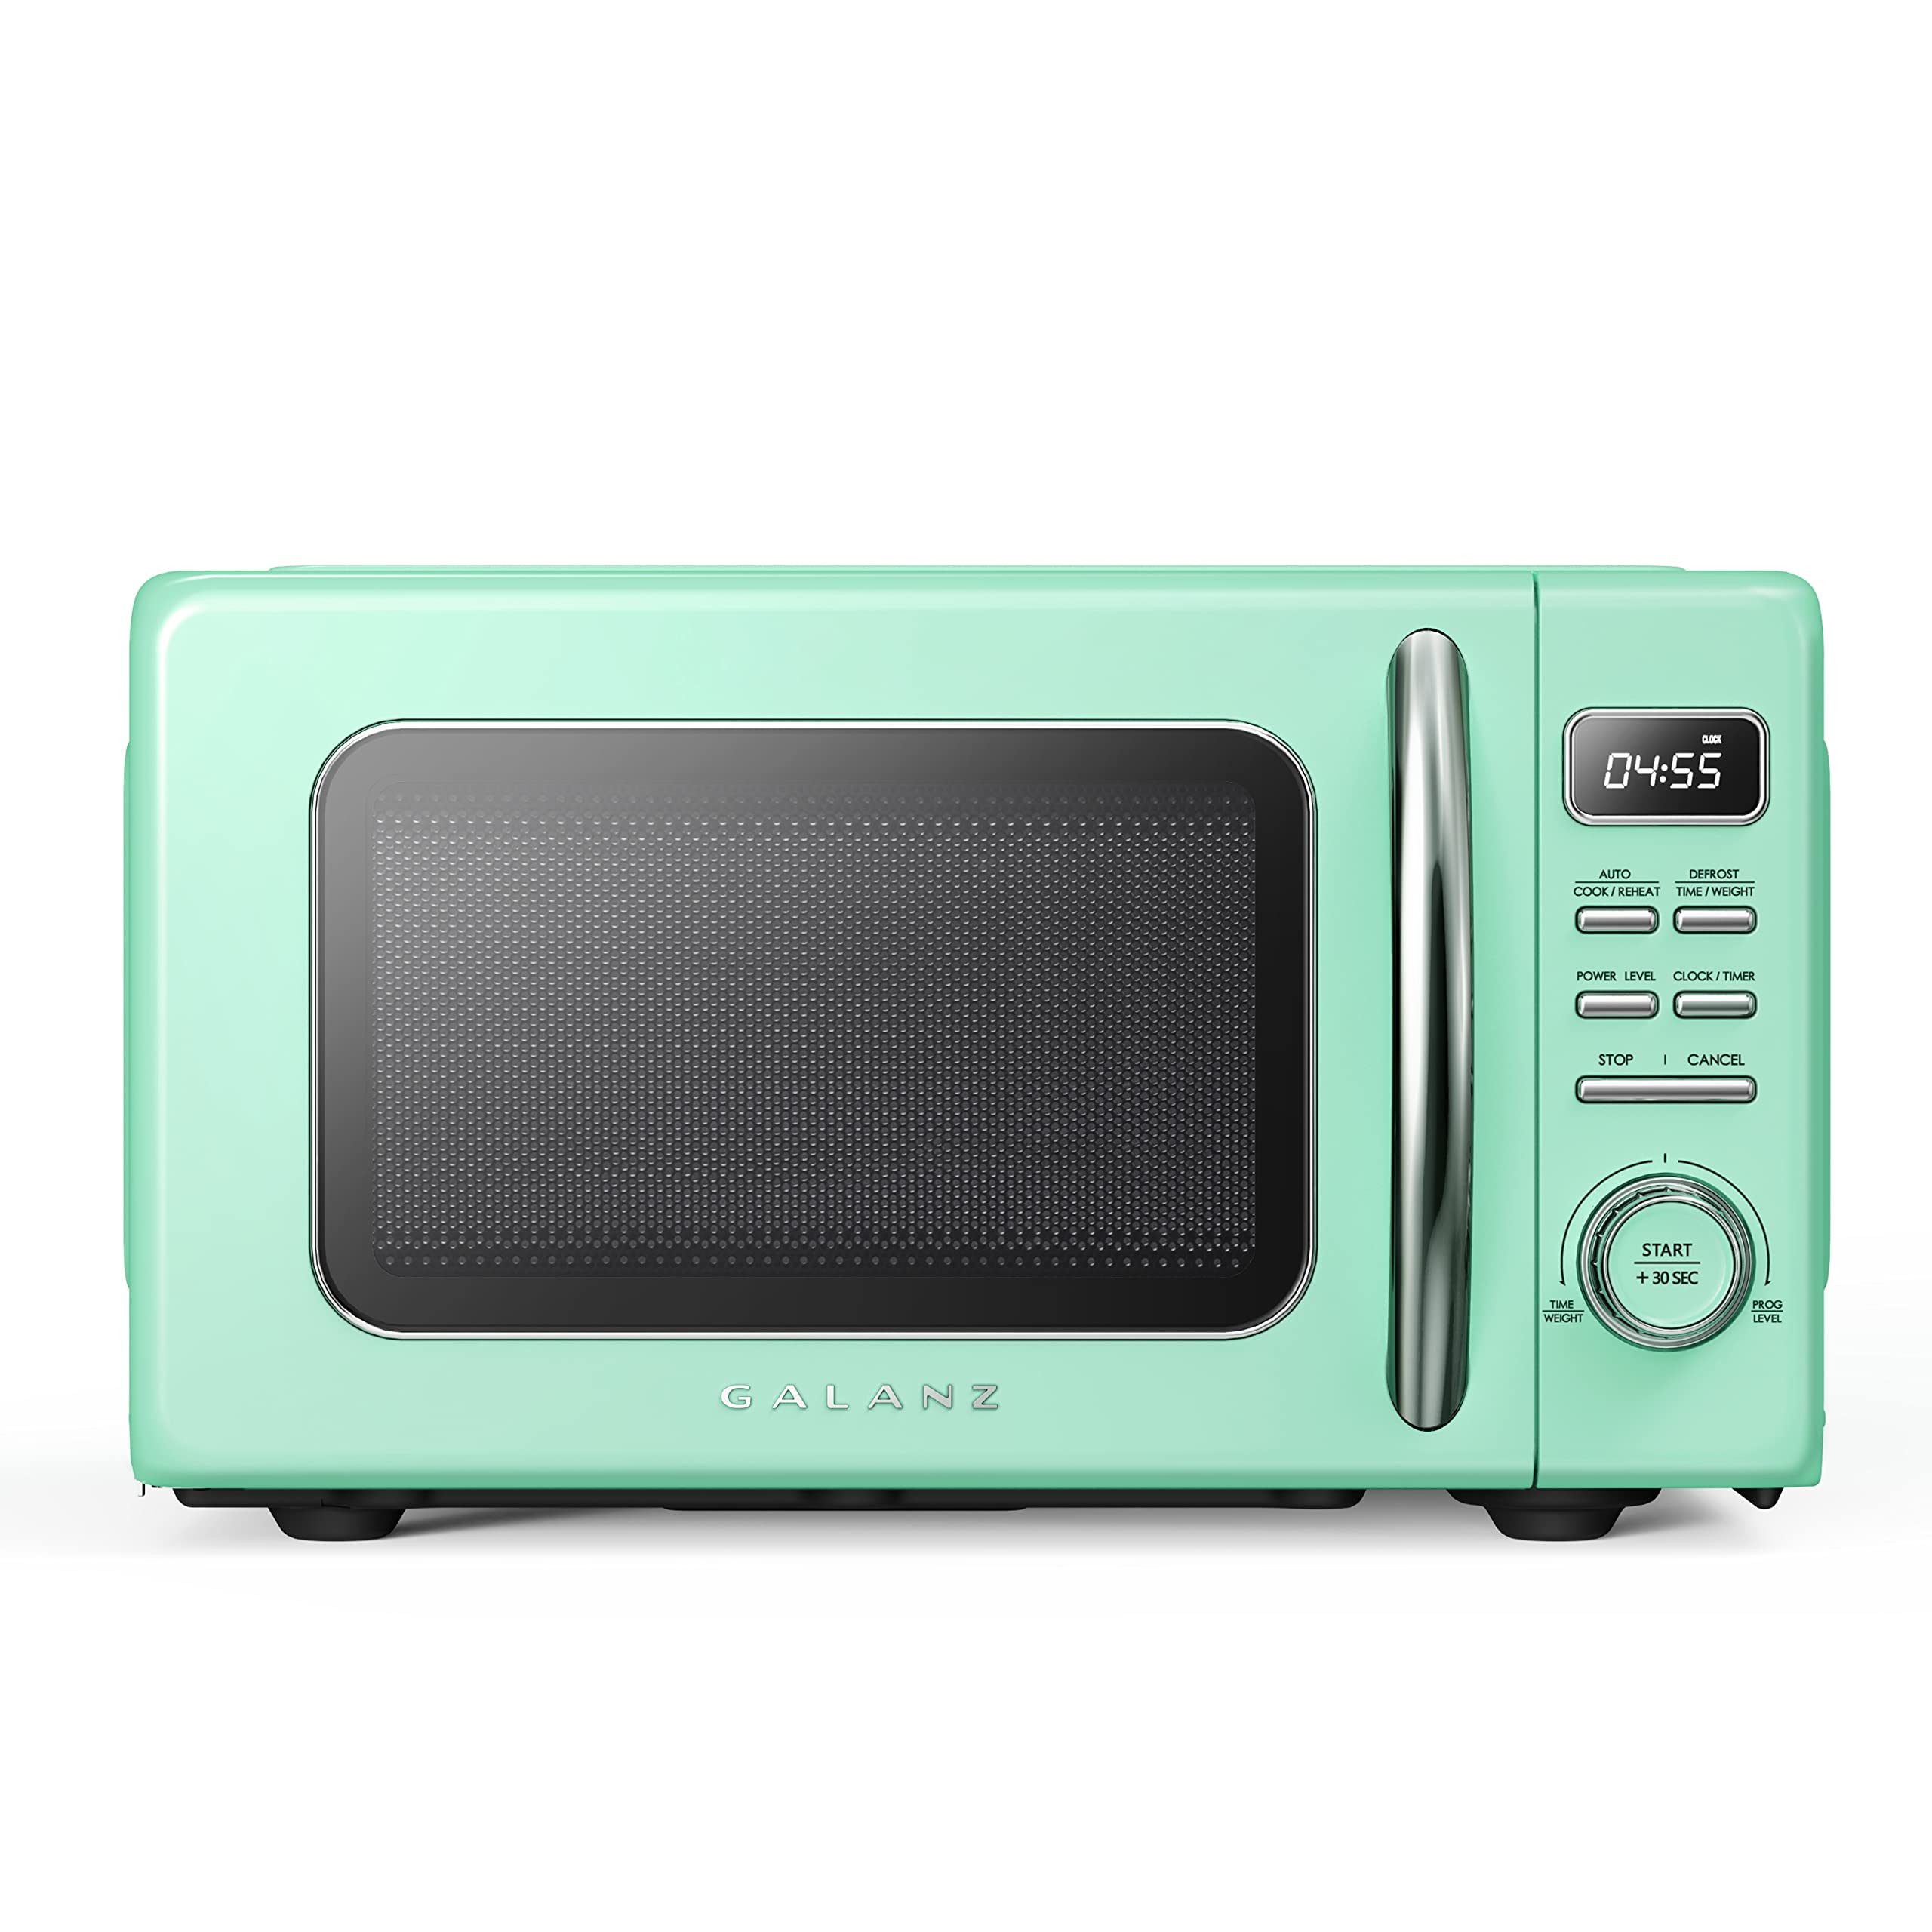 Galanz Glcmkz07Gnr07 Retro Countertop Microwave Oven With Auto Cook & Reheat, Defrost, Quick Start Functions, Easy Clean With Gl